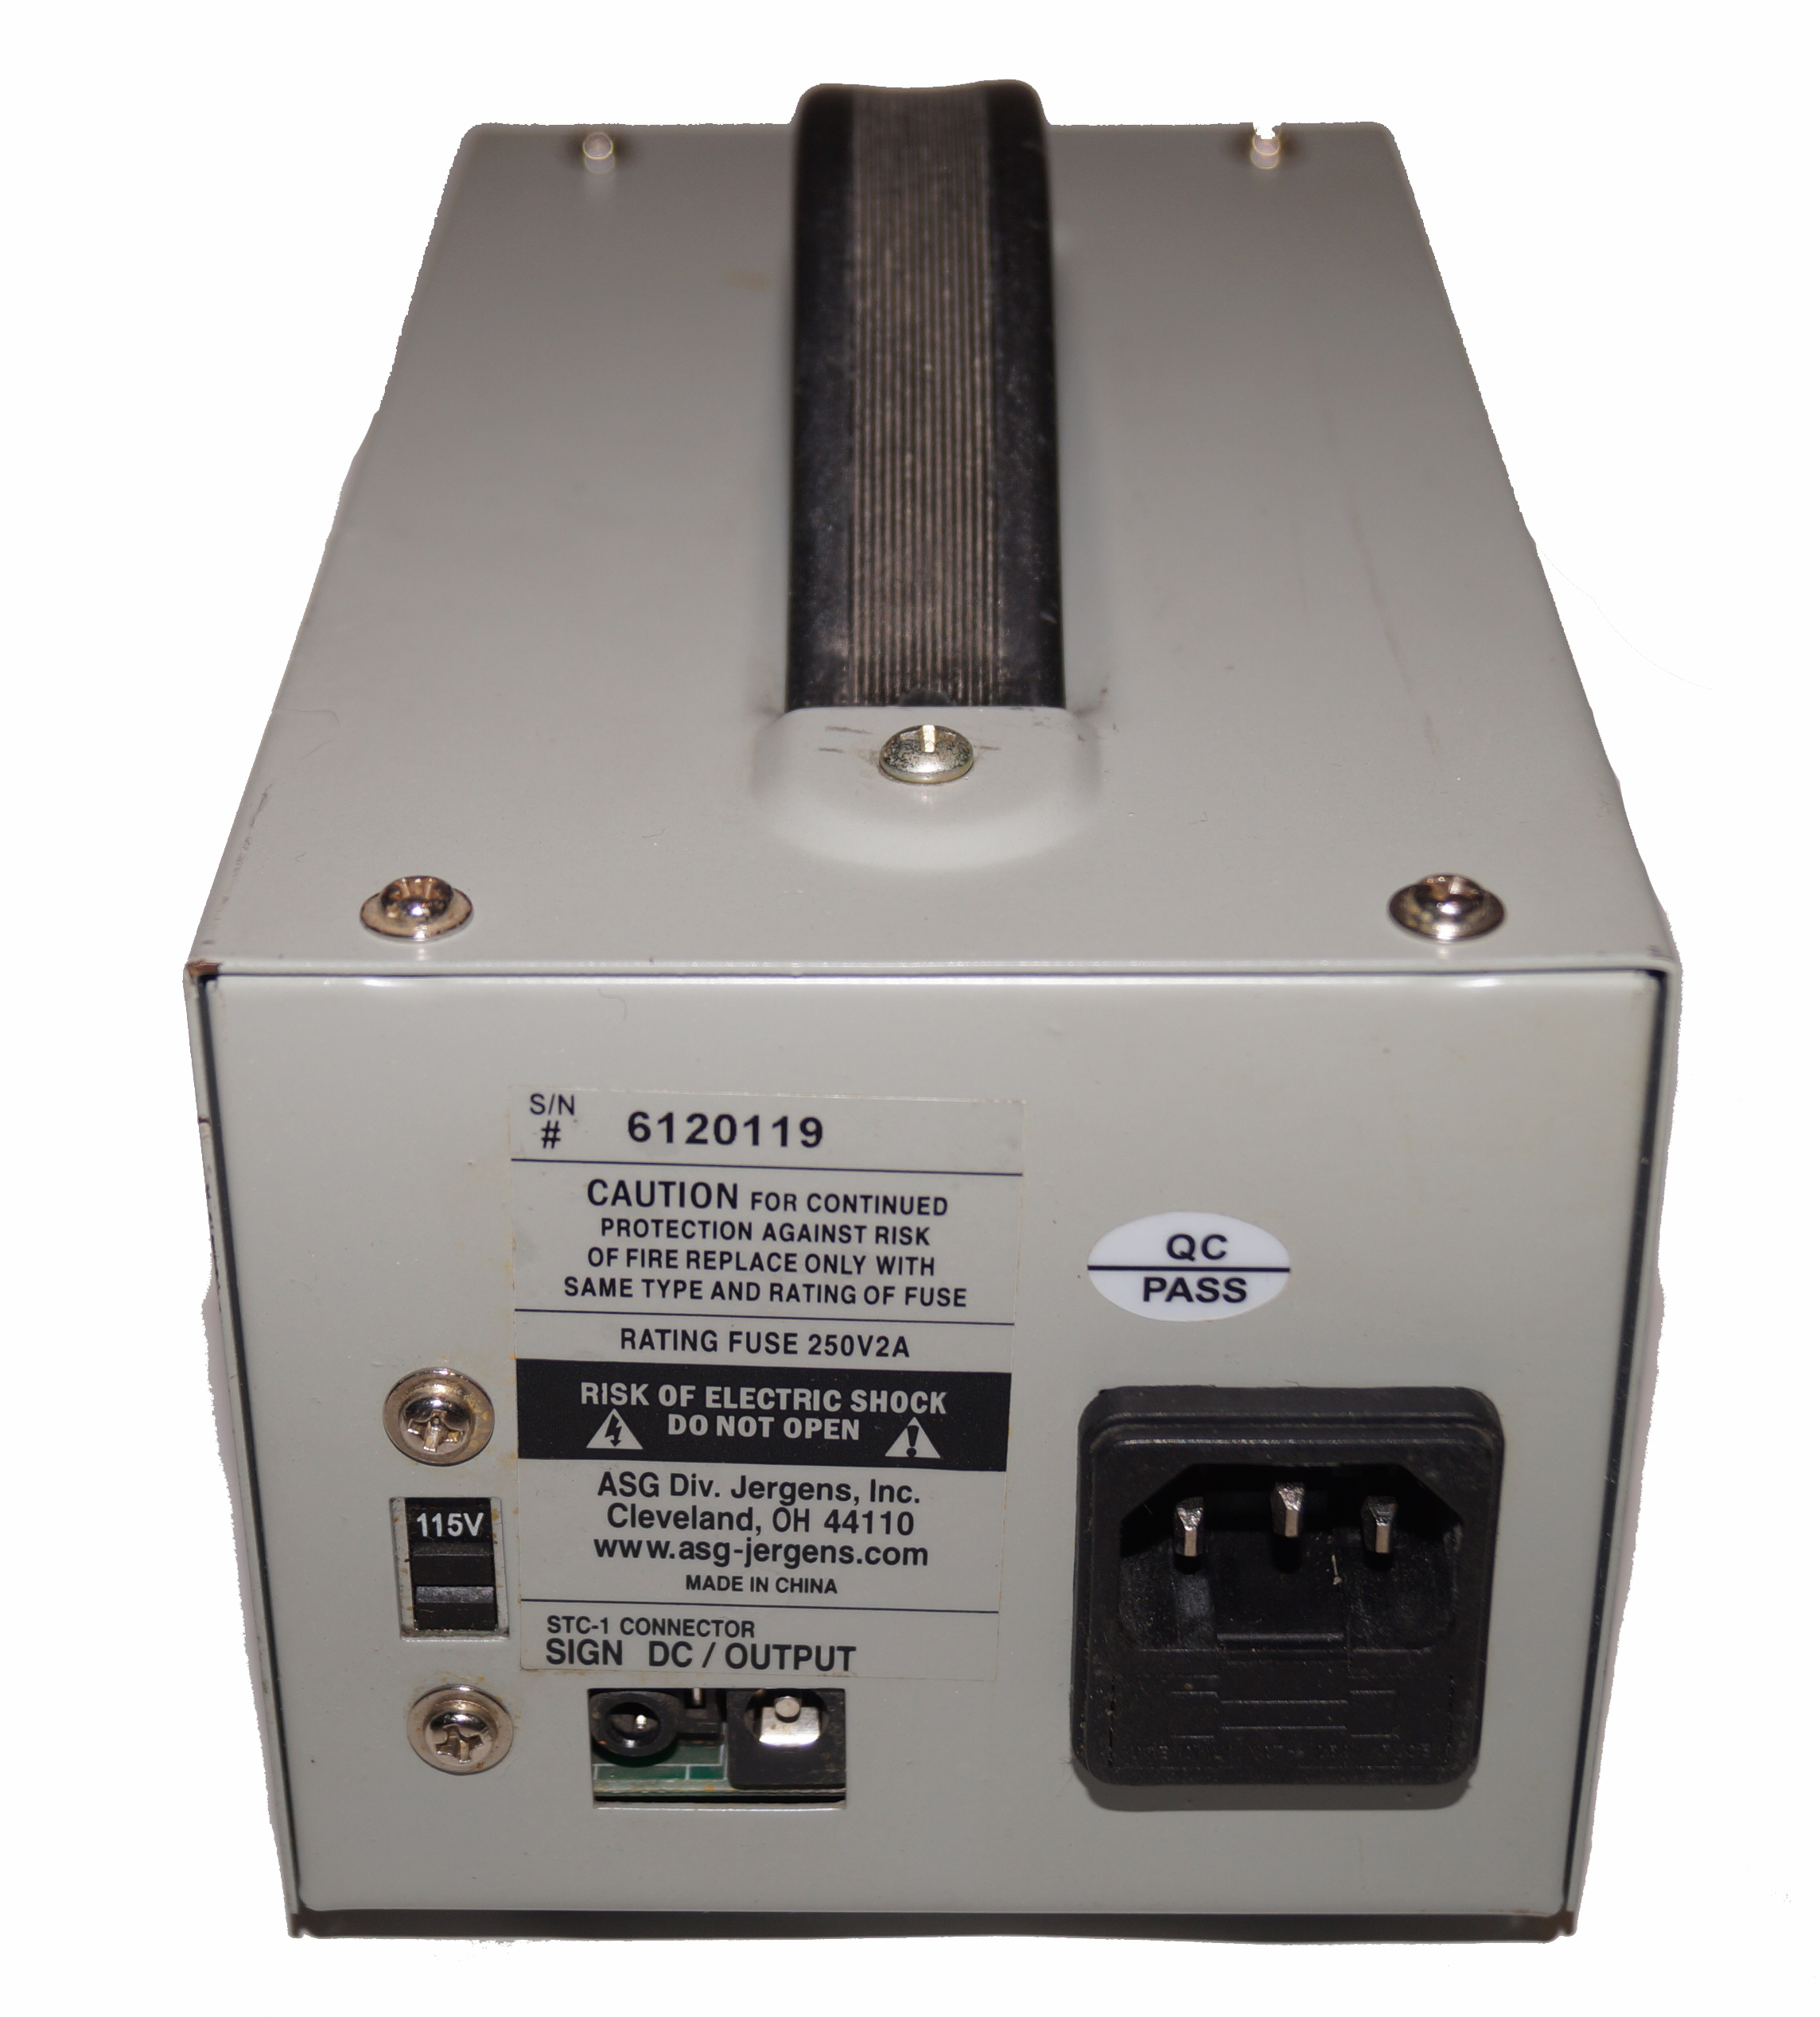 NEW ASG Assembly PS-55 Power Source DC Power Supply w/ Warranty Included! 